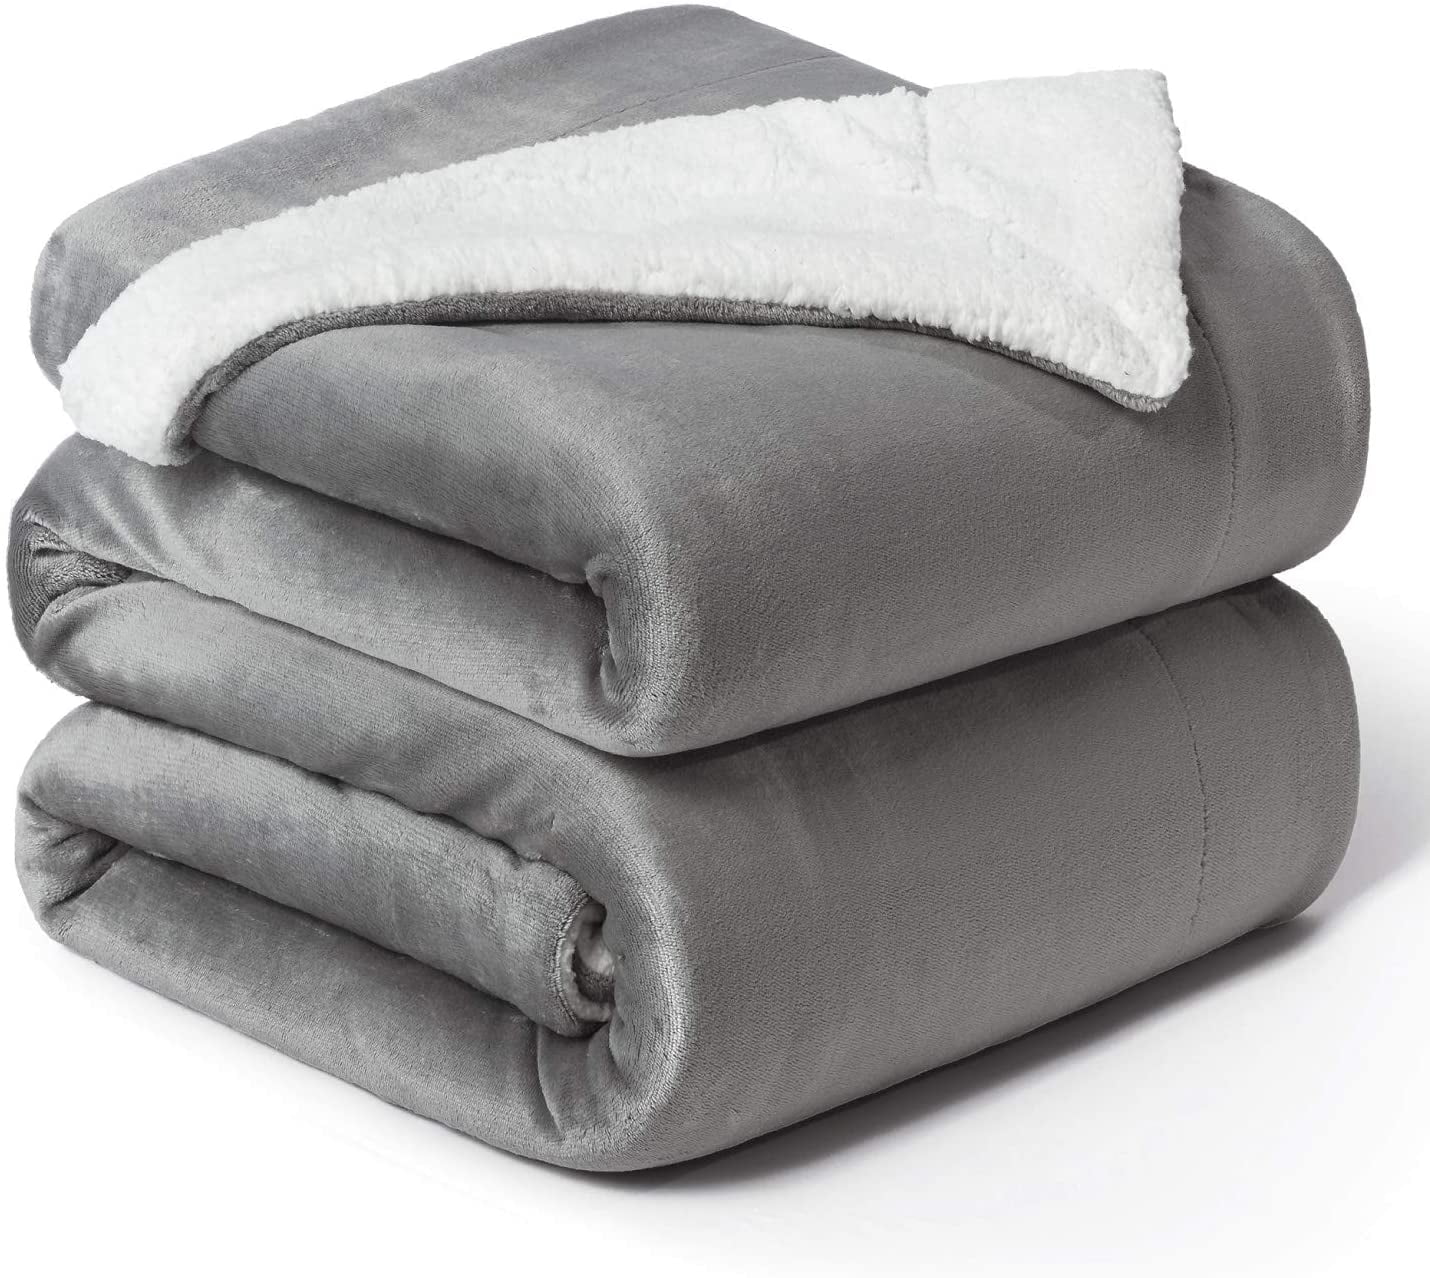 Bedsure Sherpa Fleece Throw Blanket for Couch Light Grey Thick Fuzzy Warm Soft Blankets and Throws for Sofa 50x60 Inches